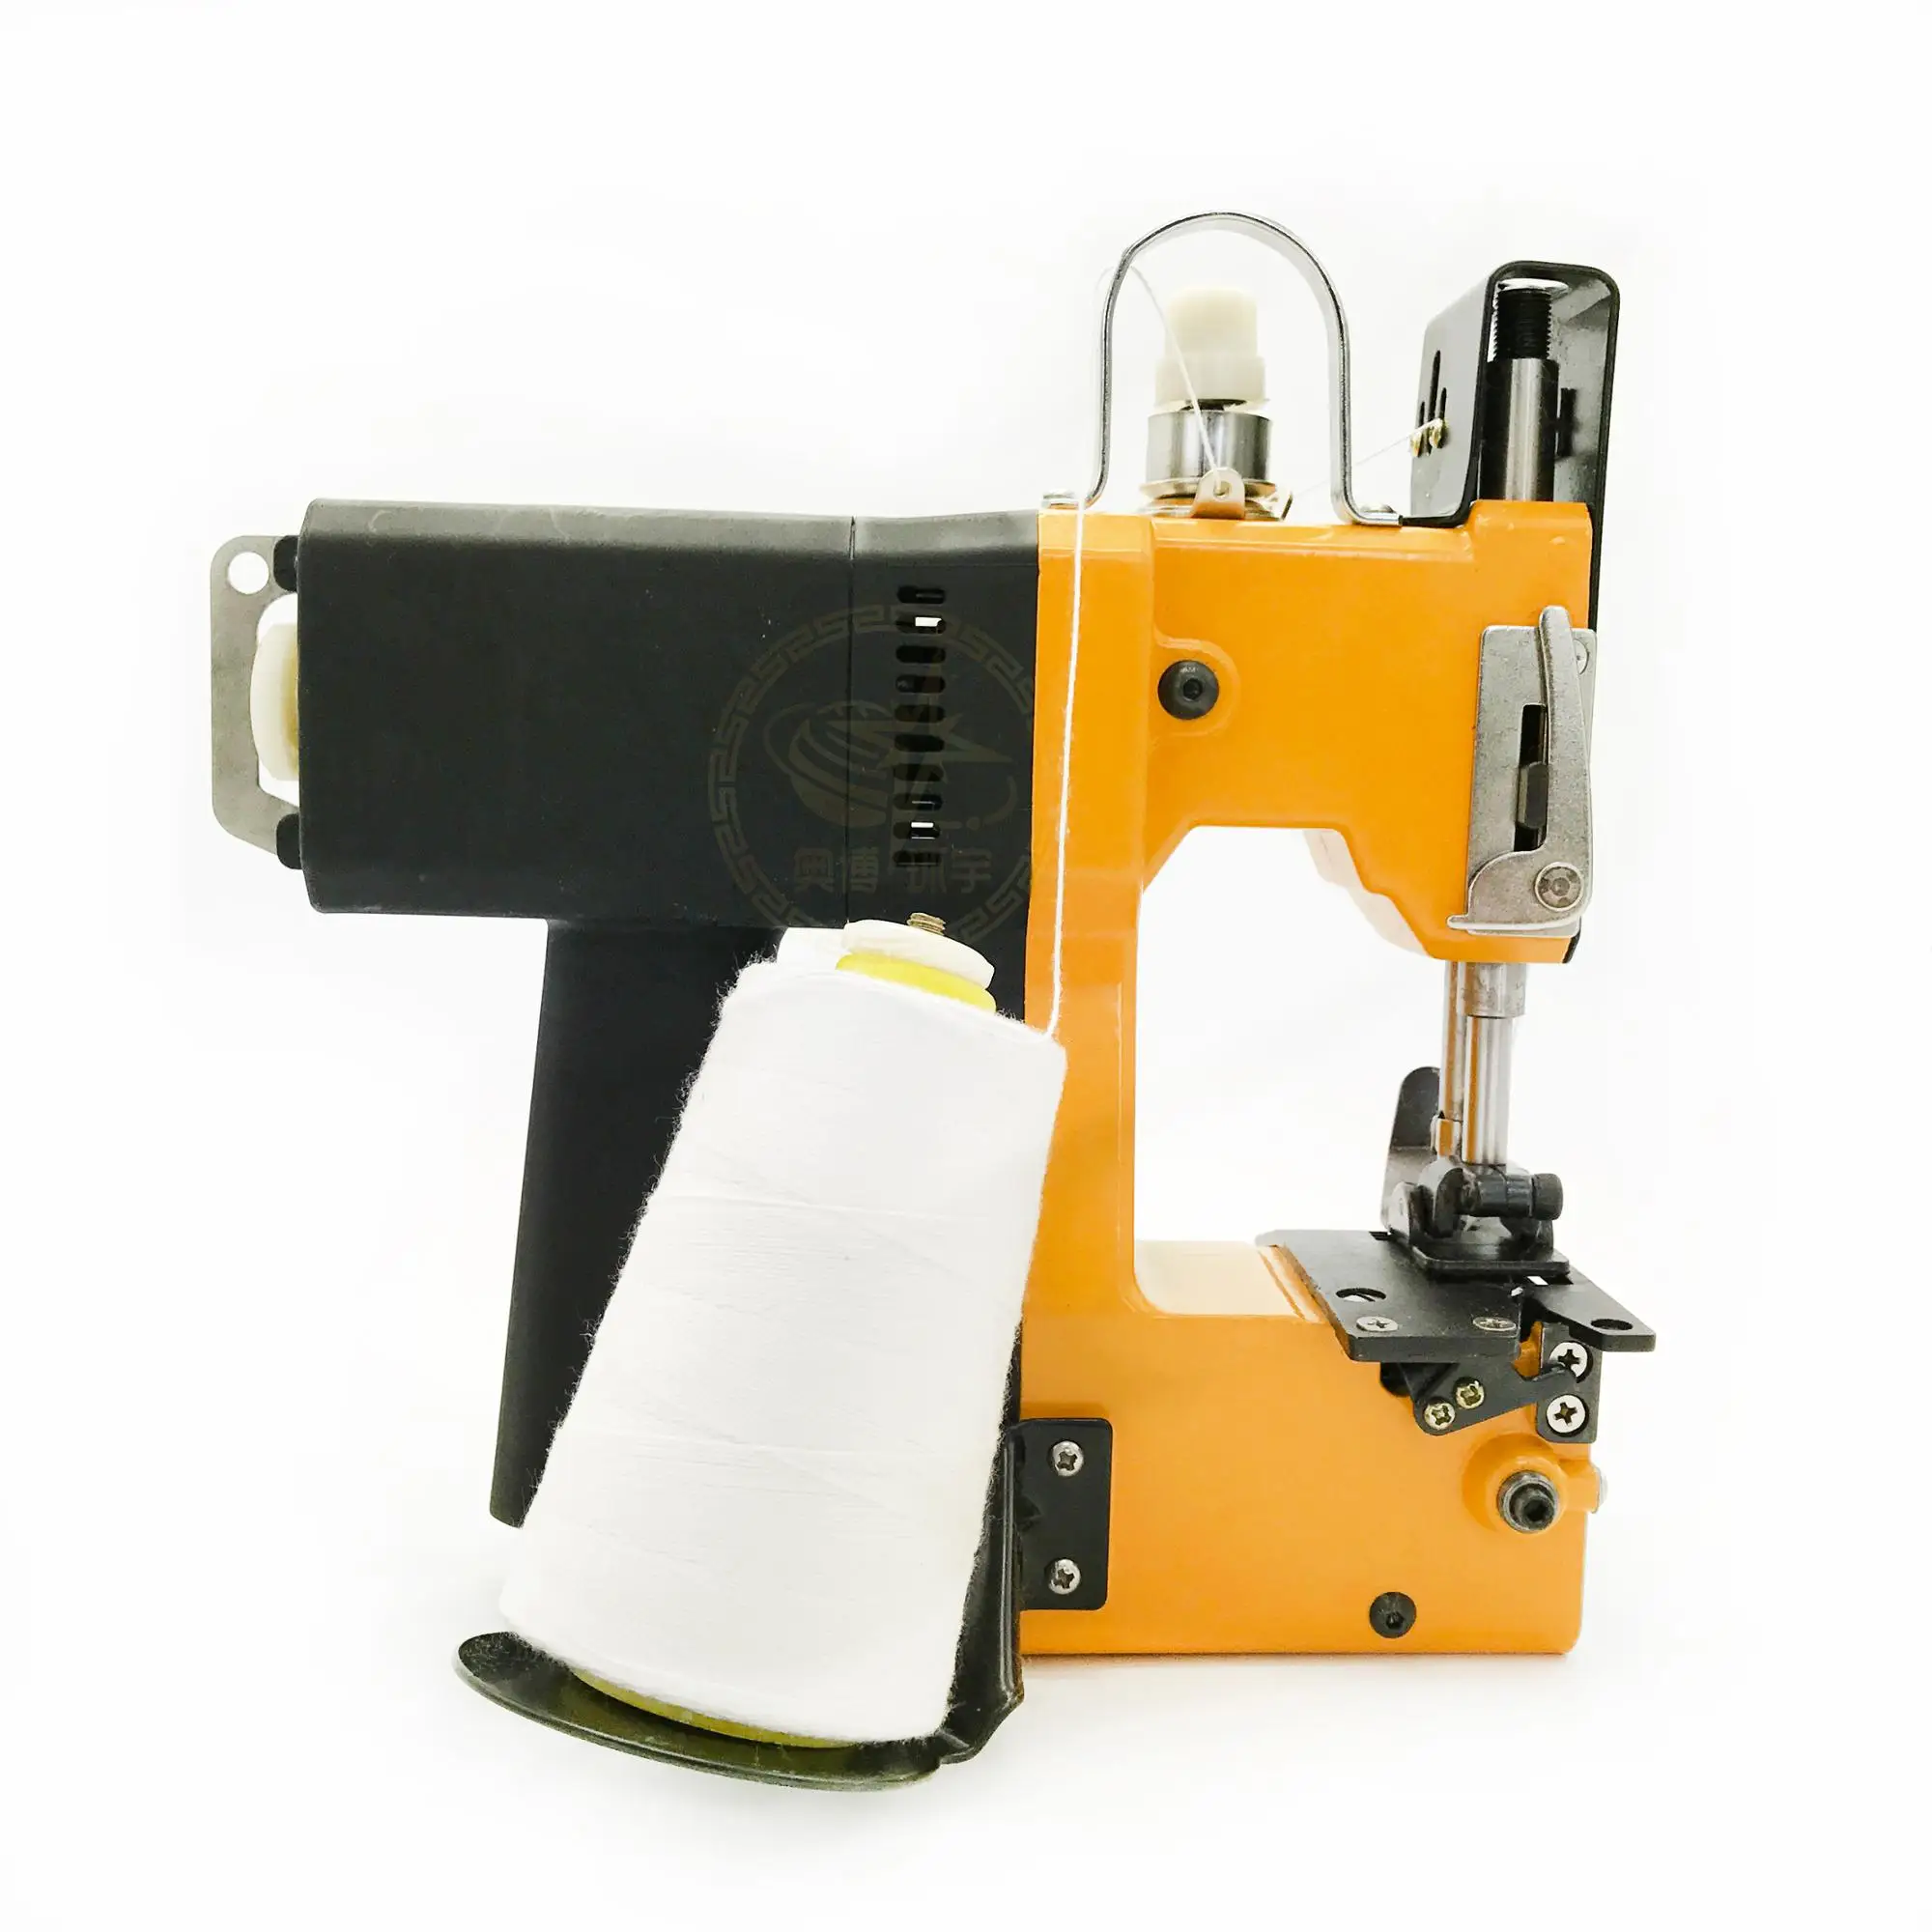 Get A Wholesale gunny bag stitching machine For Your Business - Alibaba.com